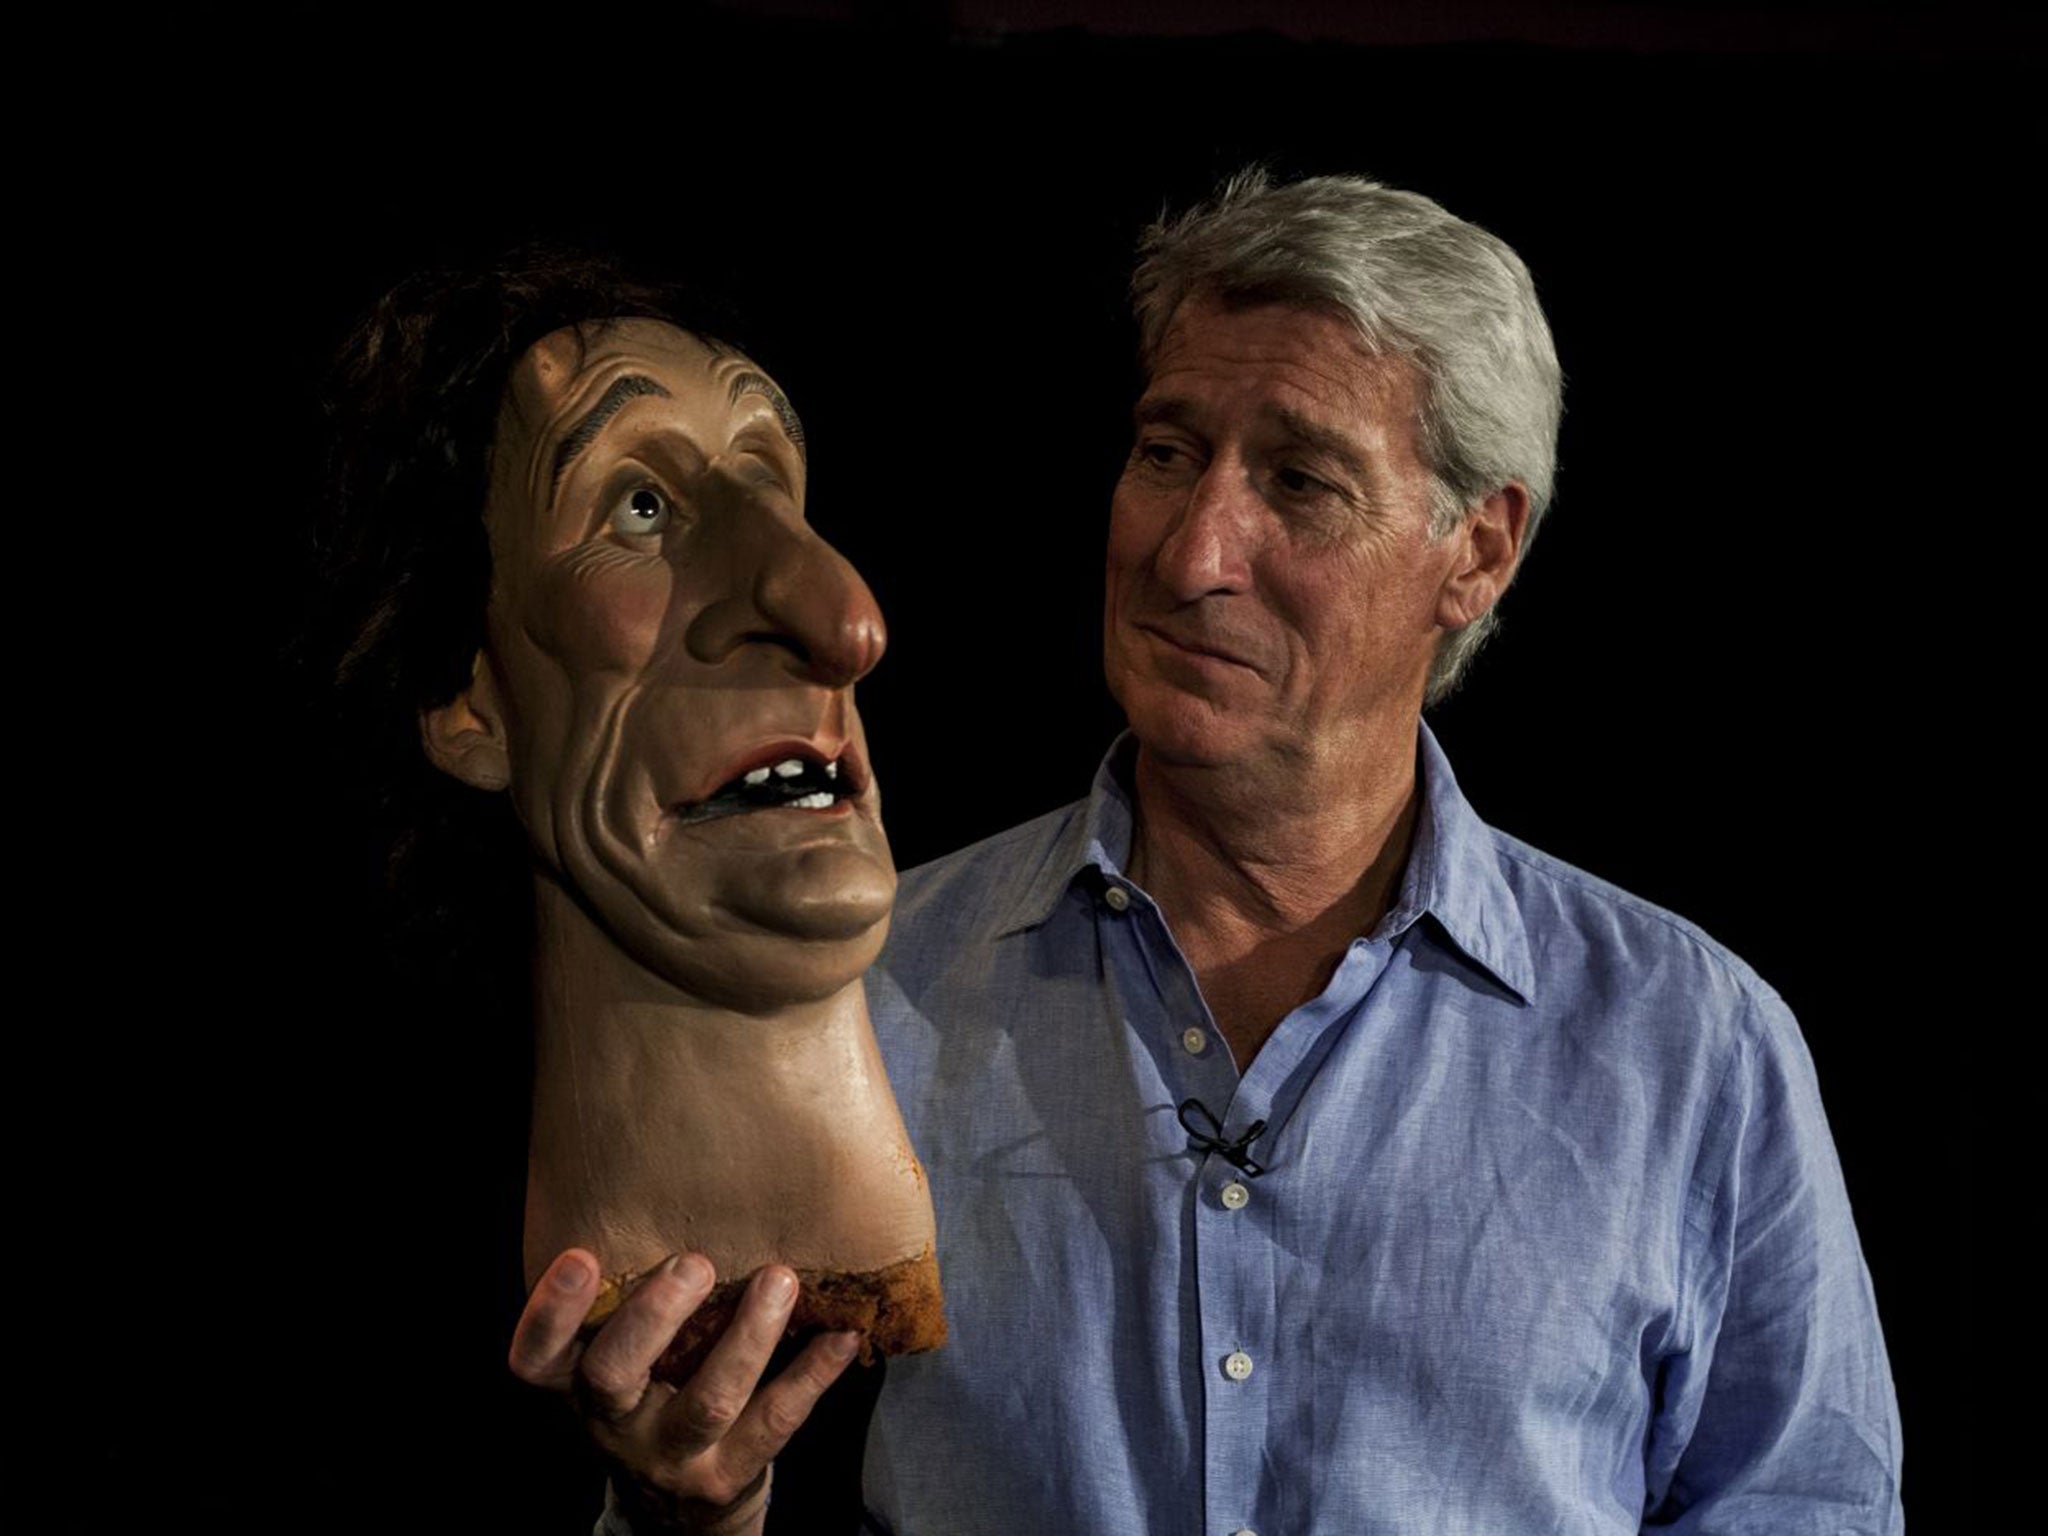 Jeremy Paxman’s one-man Fringe show is, surprisingly, a full theatrical production